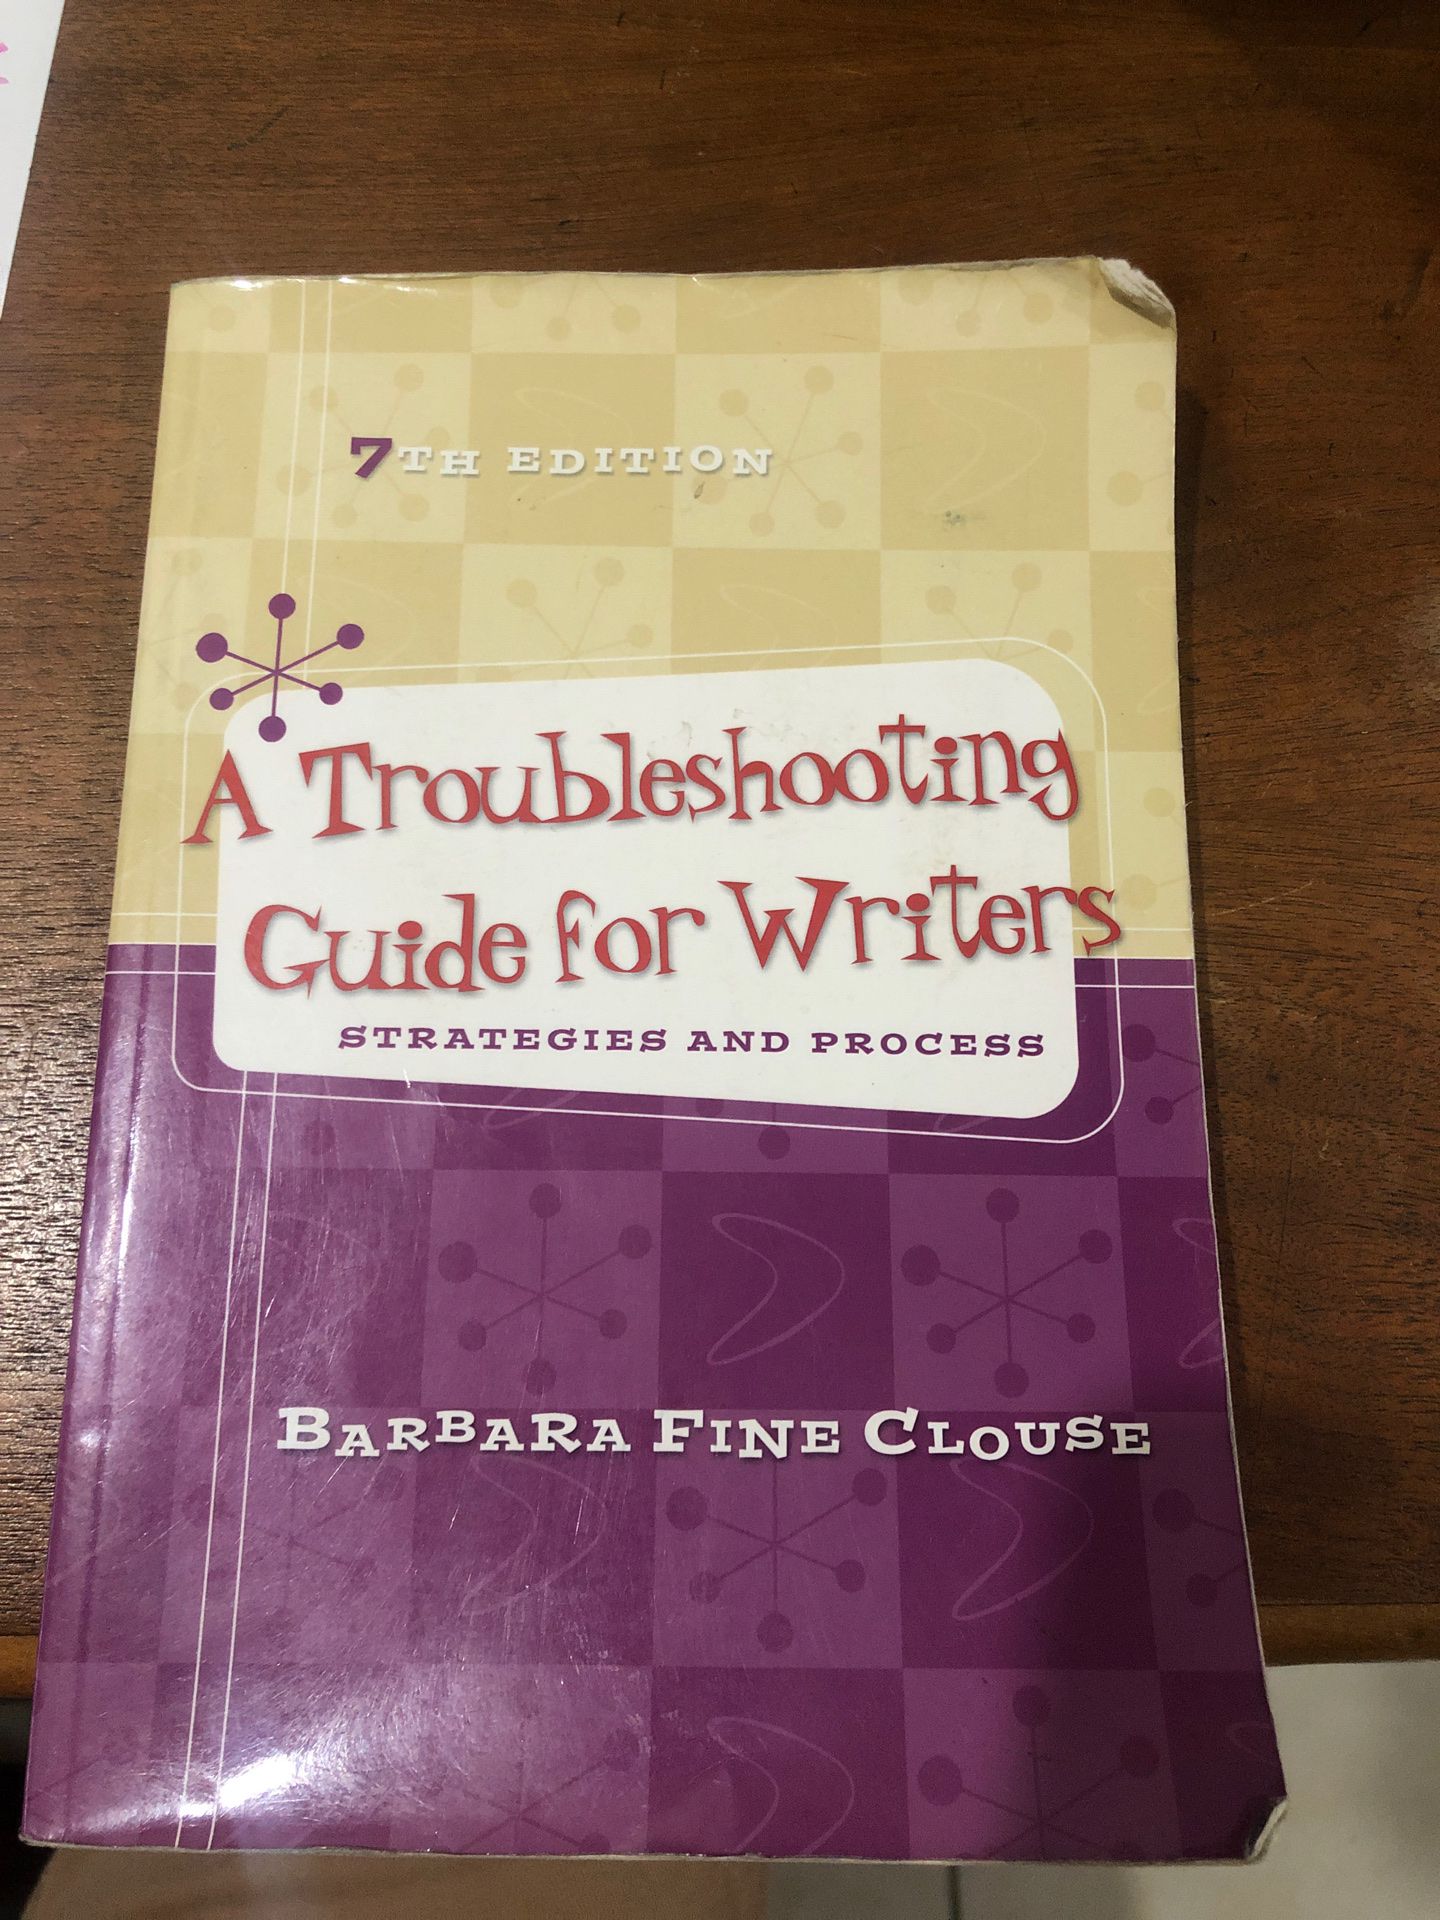 A troubleshooting guide for writers